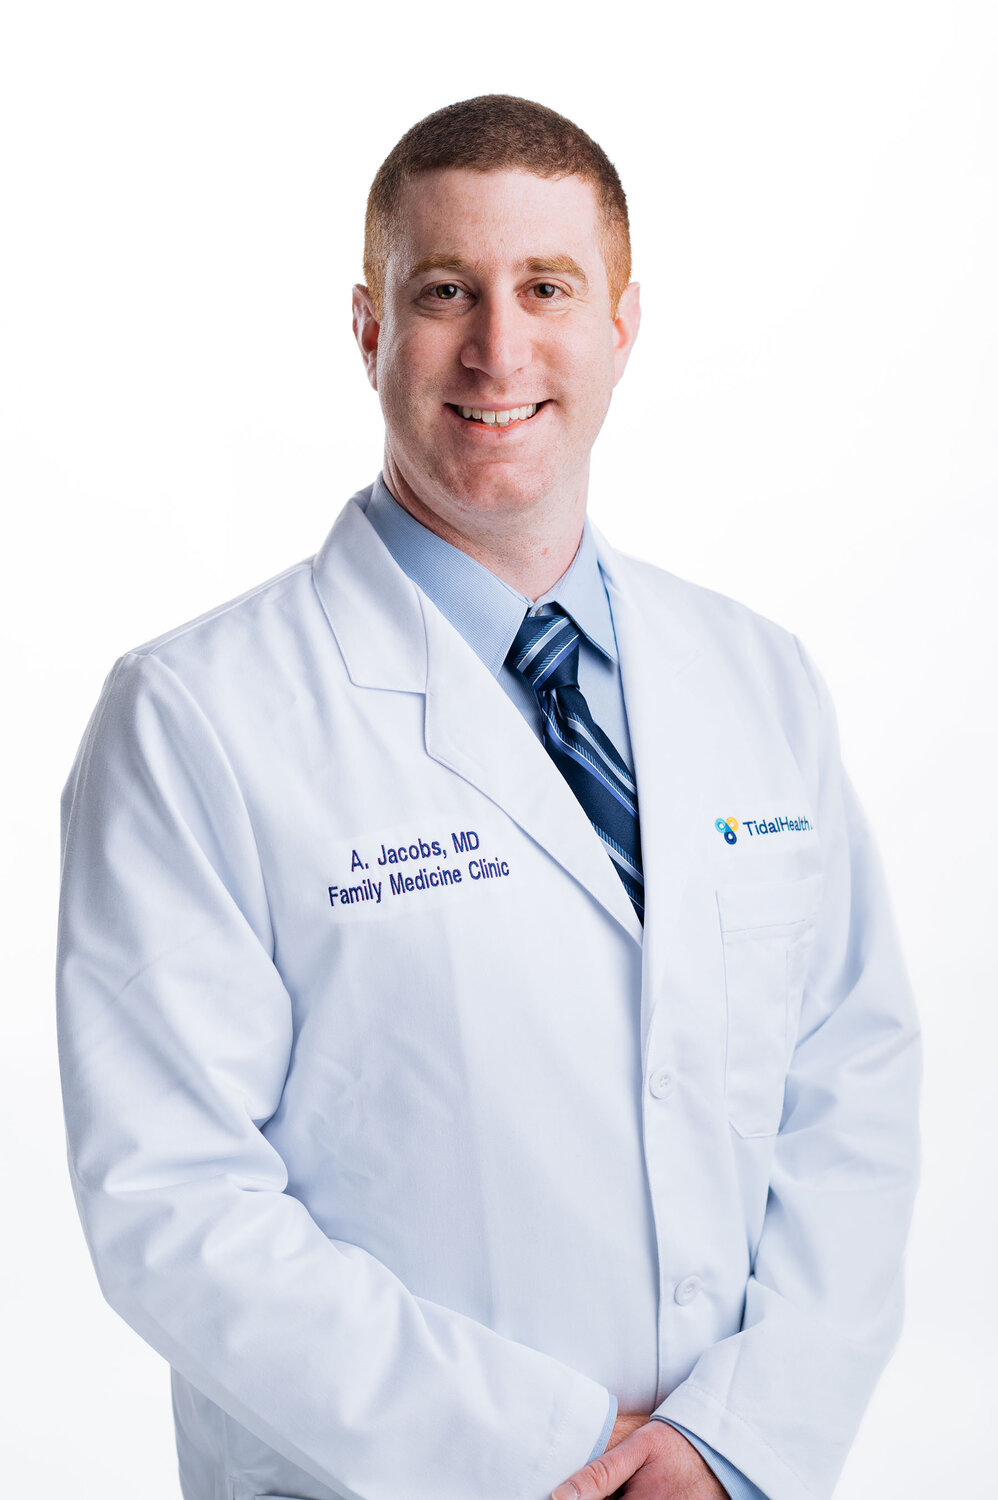 Andrew Jacobs, MD (Courtesy photo)